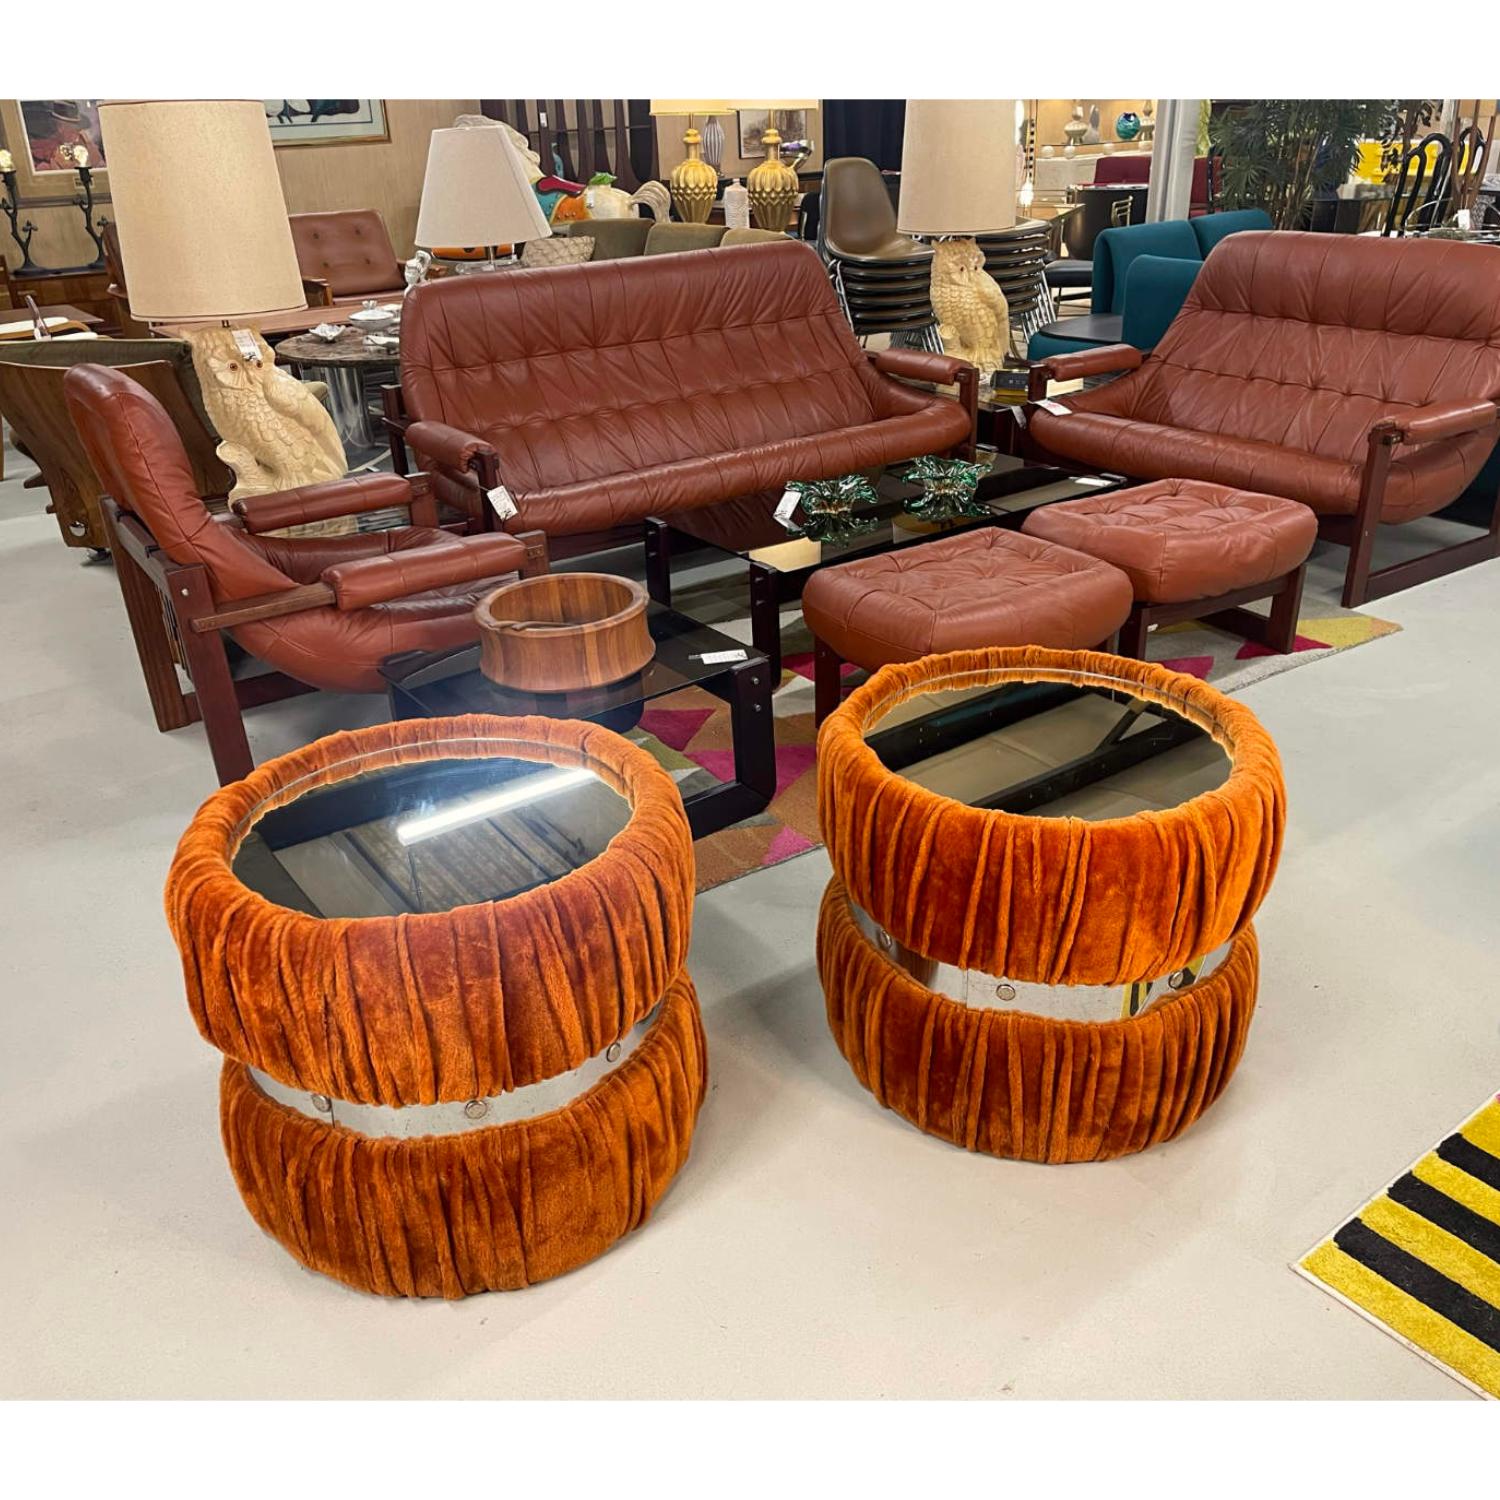 This vintage 1970s end / side table set pulls out all the stops. The tables are gratuitously covered in thick furry fabric with undulating folds of fabric giving a look of decadence. The generous upholstery is gathered by a studded chrome band at